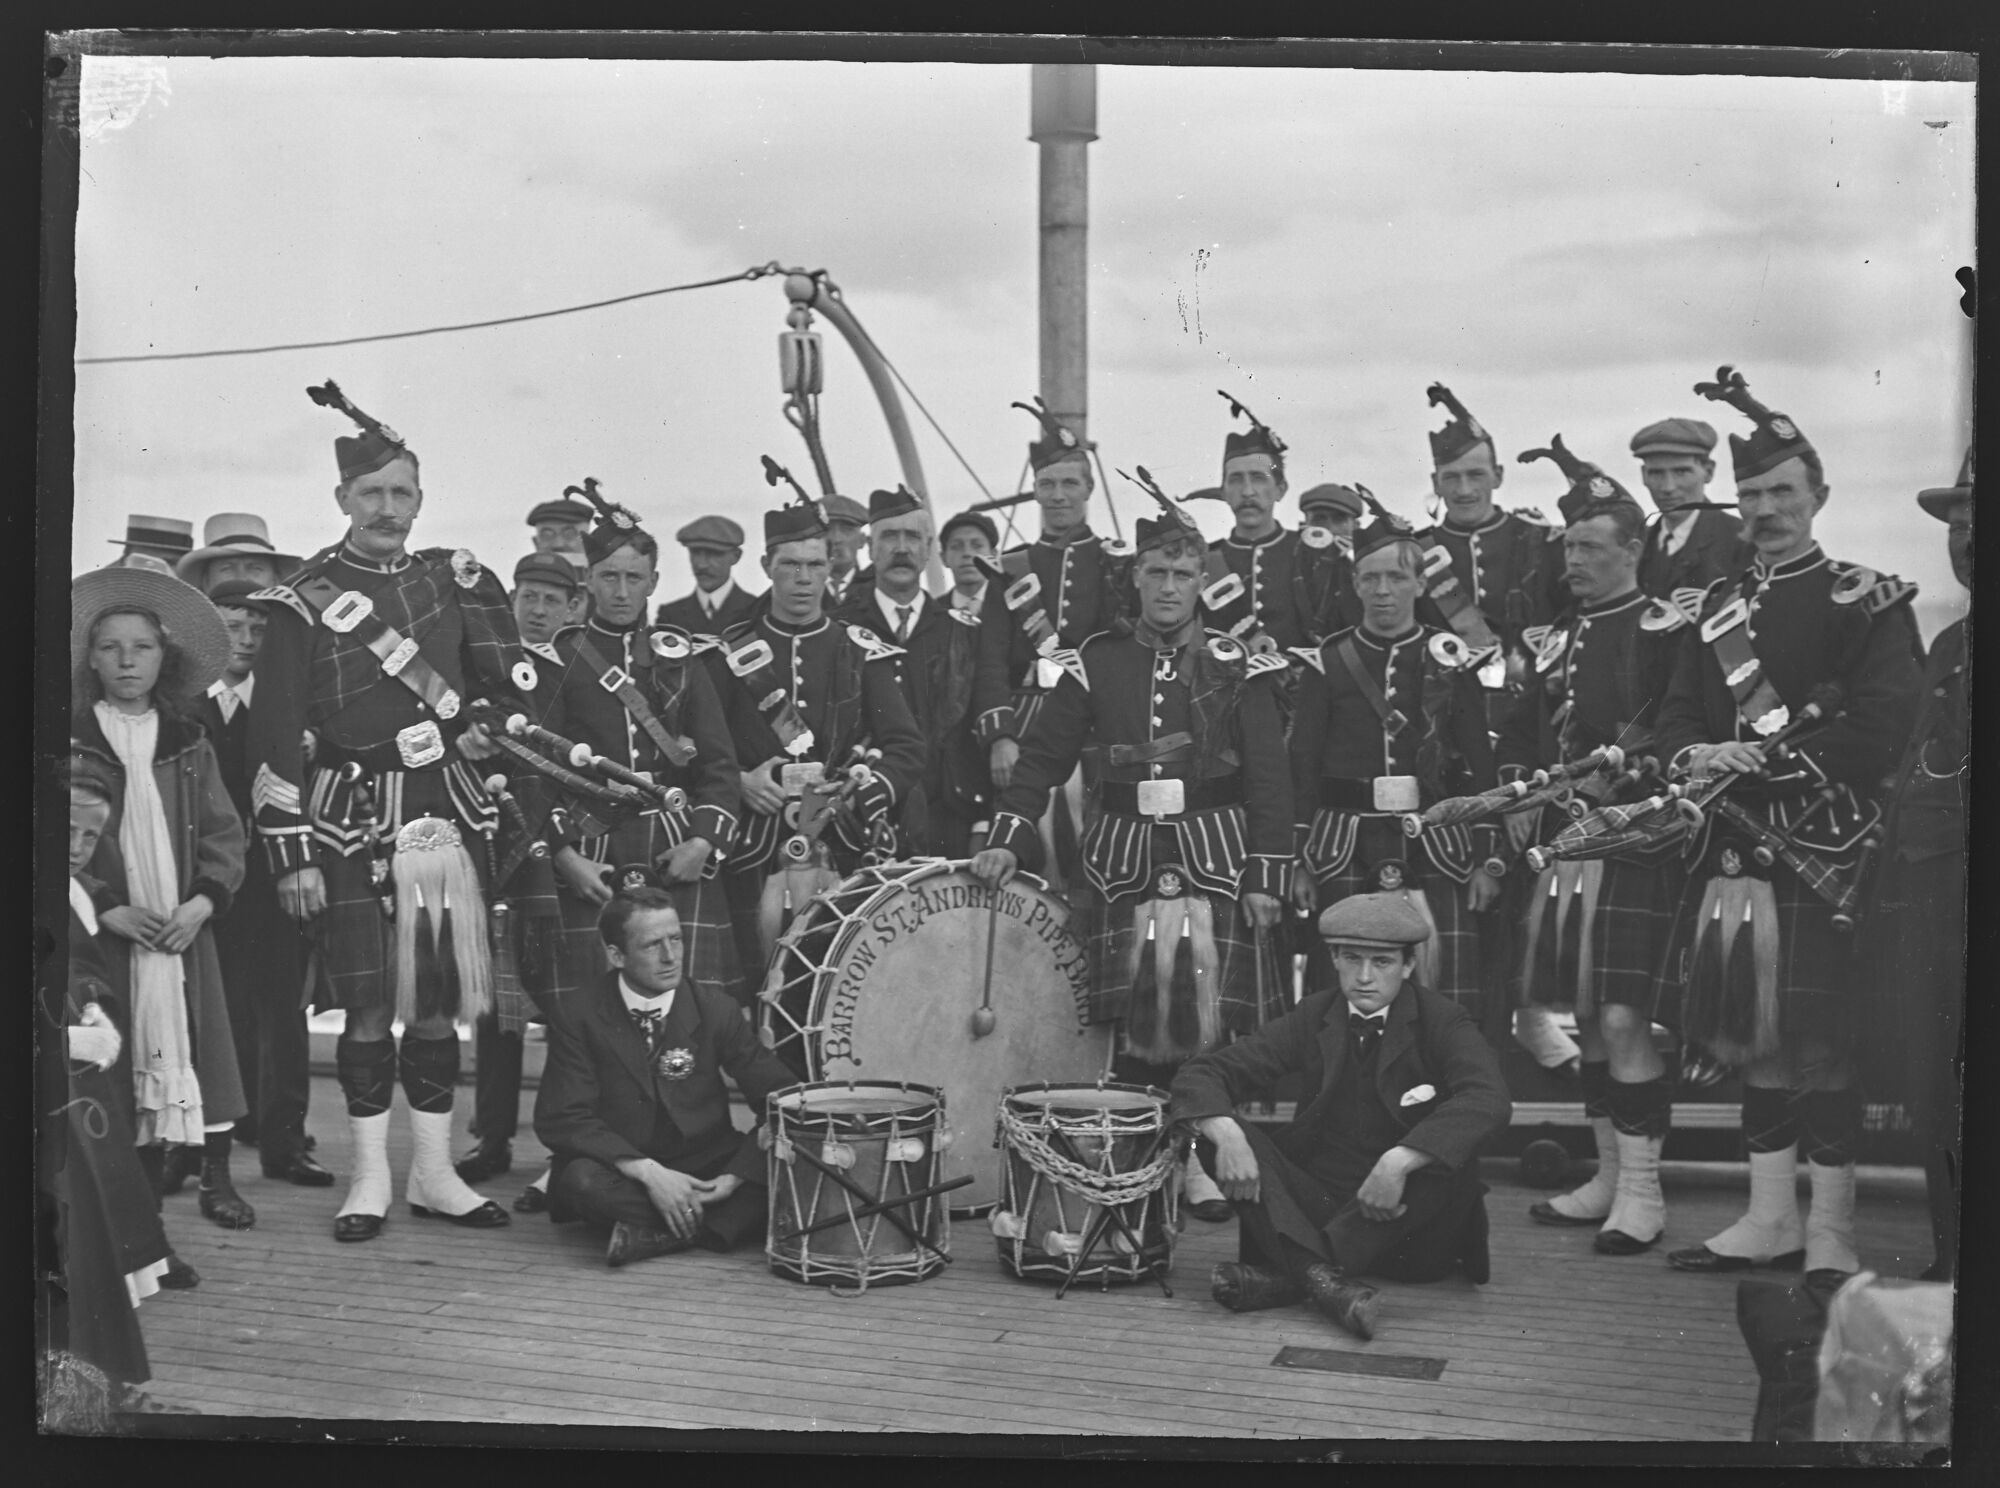 St. Andrews Pipe Band, Barrow-in-Furness